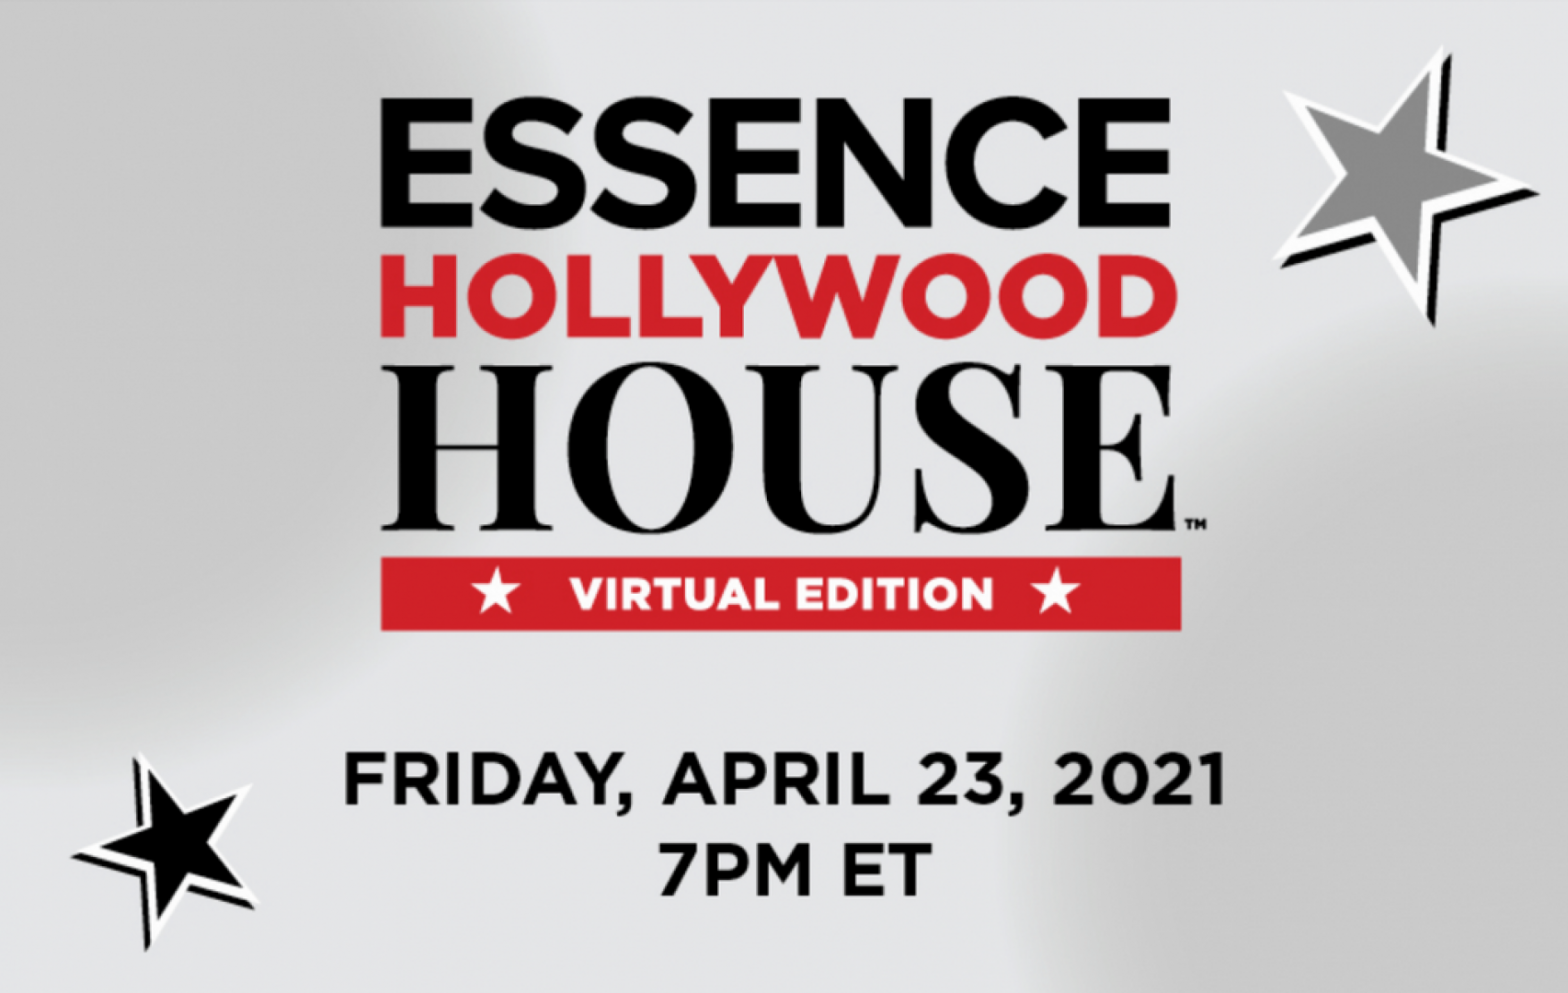 ESSENCE Hollywood House: Join Some Of Your Faves From 'Insecure', 'Bridgerton', 'Snowfall' & More!